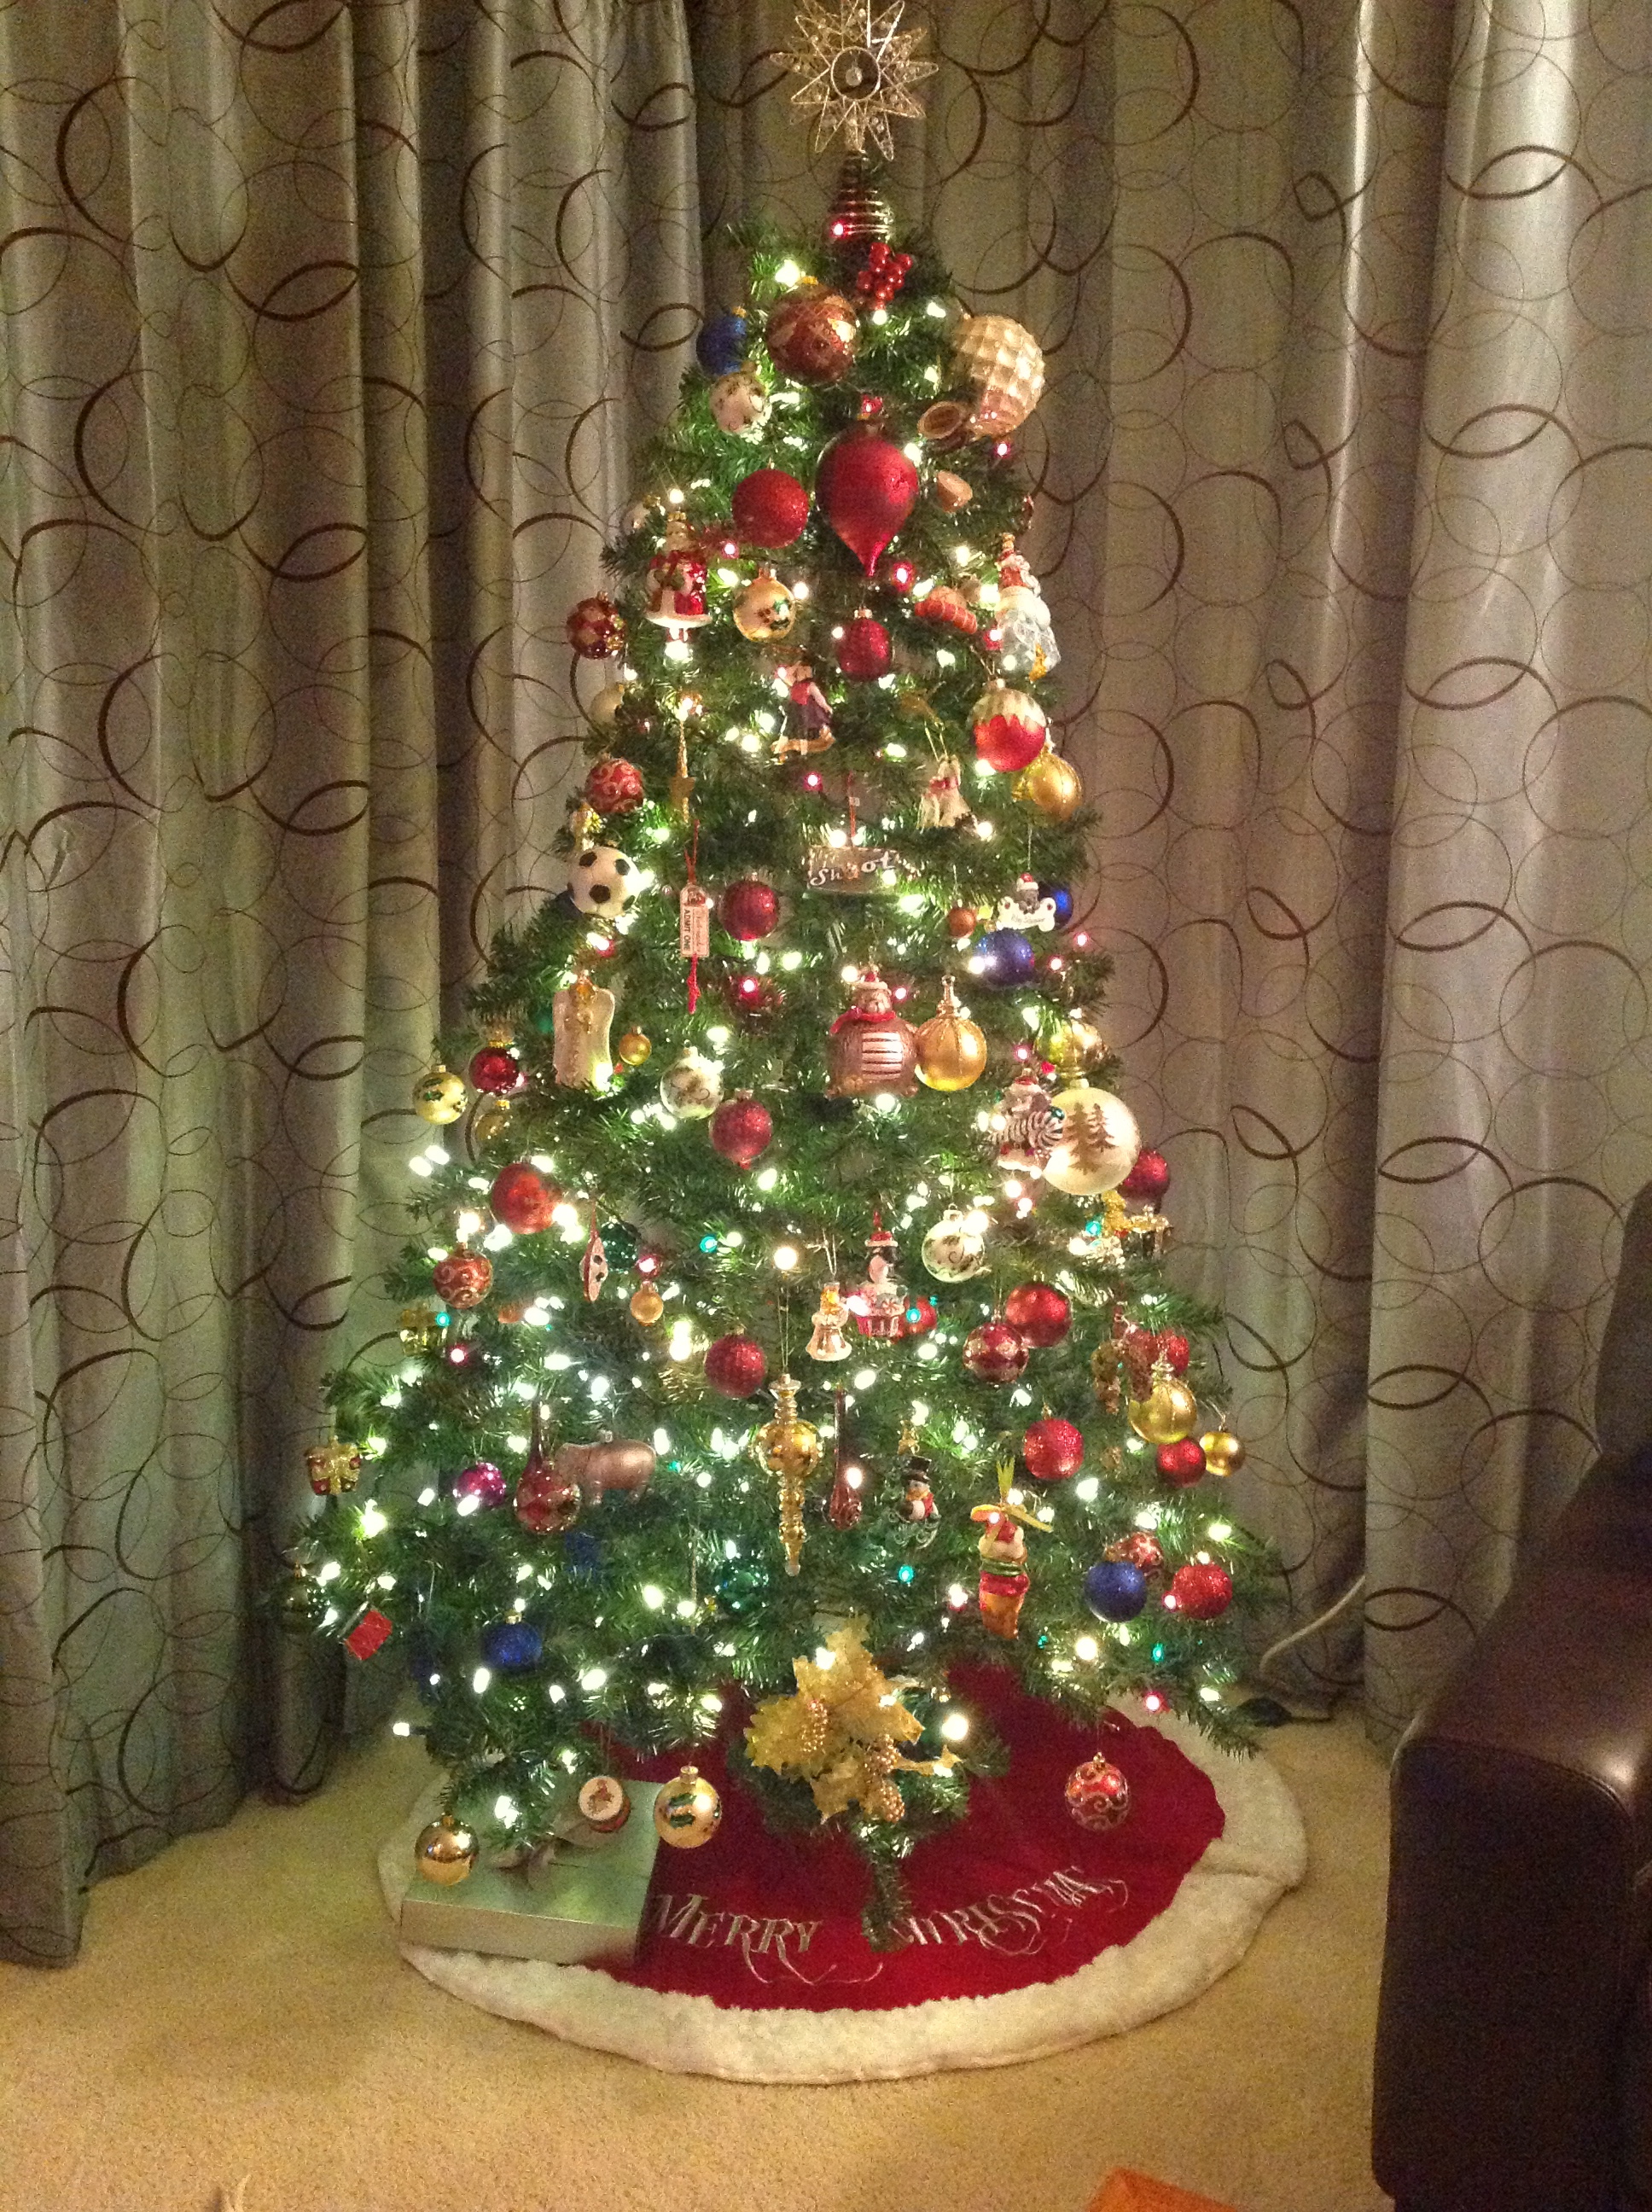 Our Tree!